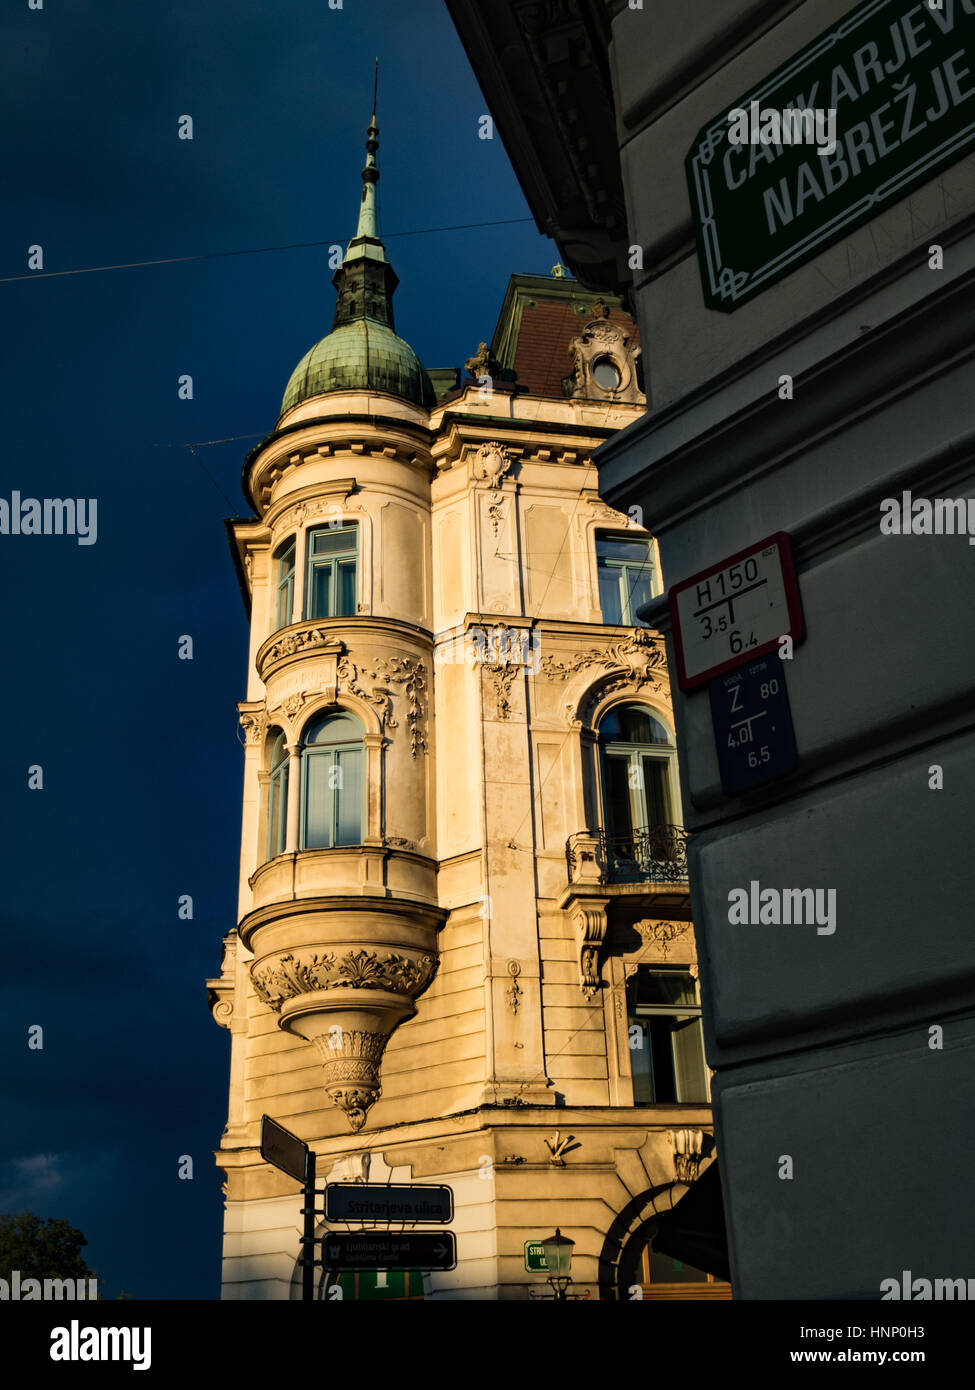 Facade of a building in the Old Town portion of Ljubljana, Slovenia. Stock Photo